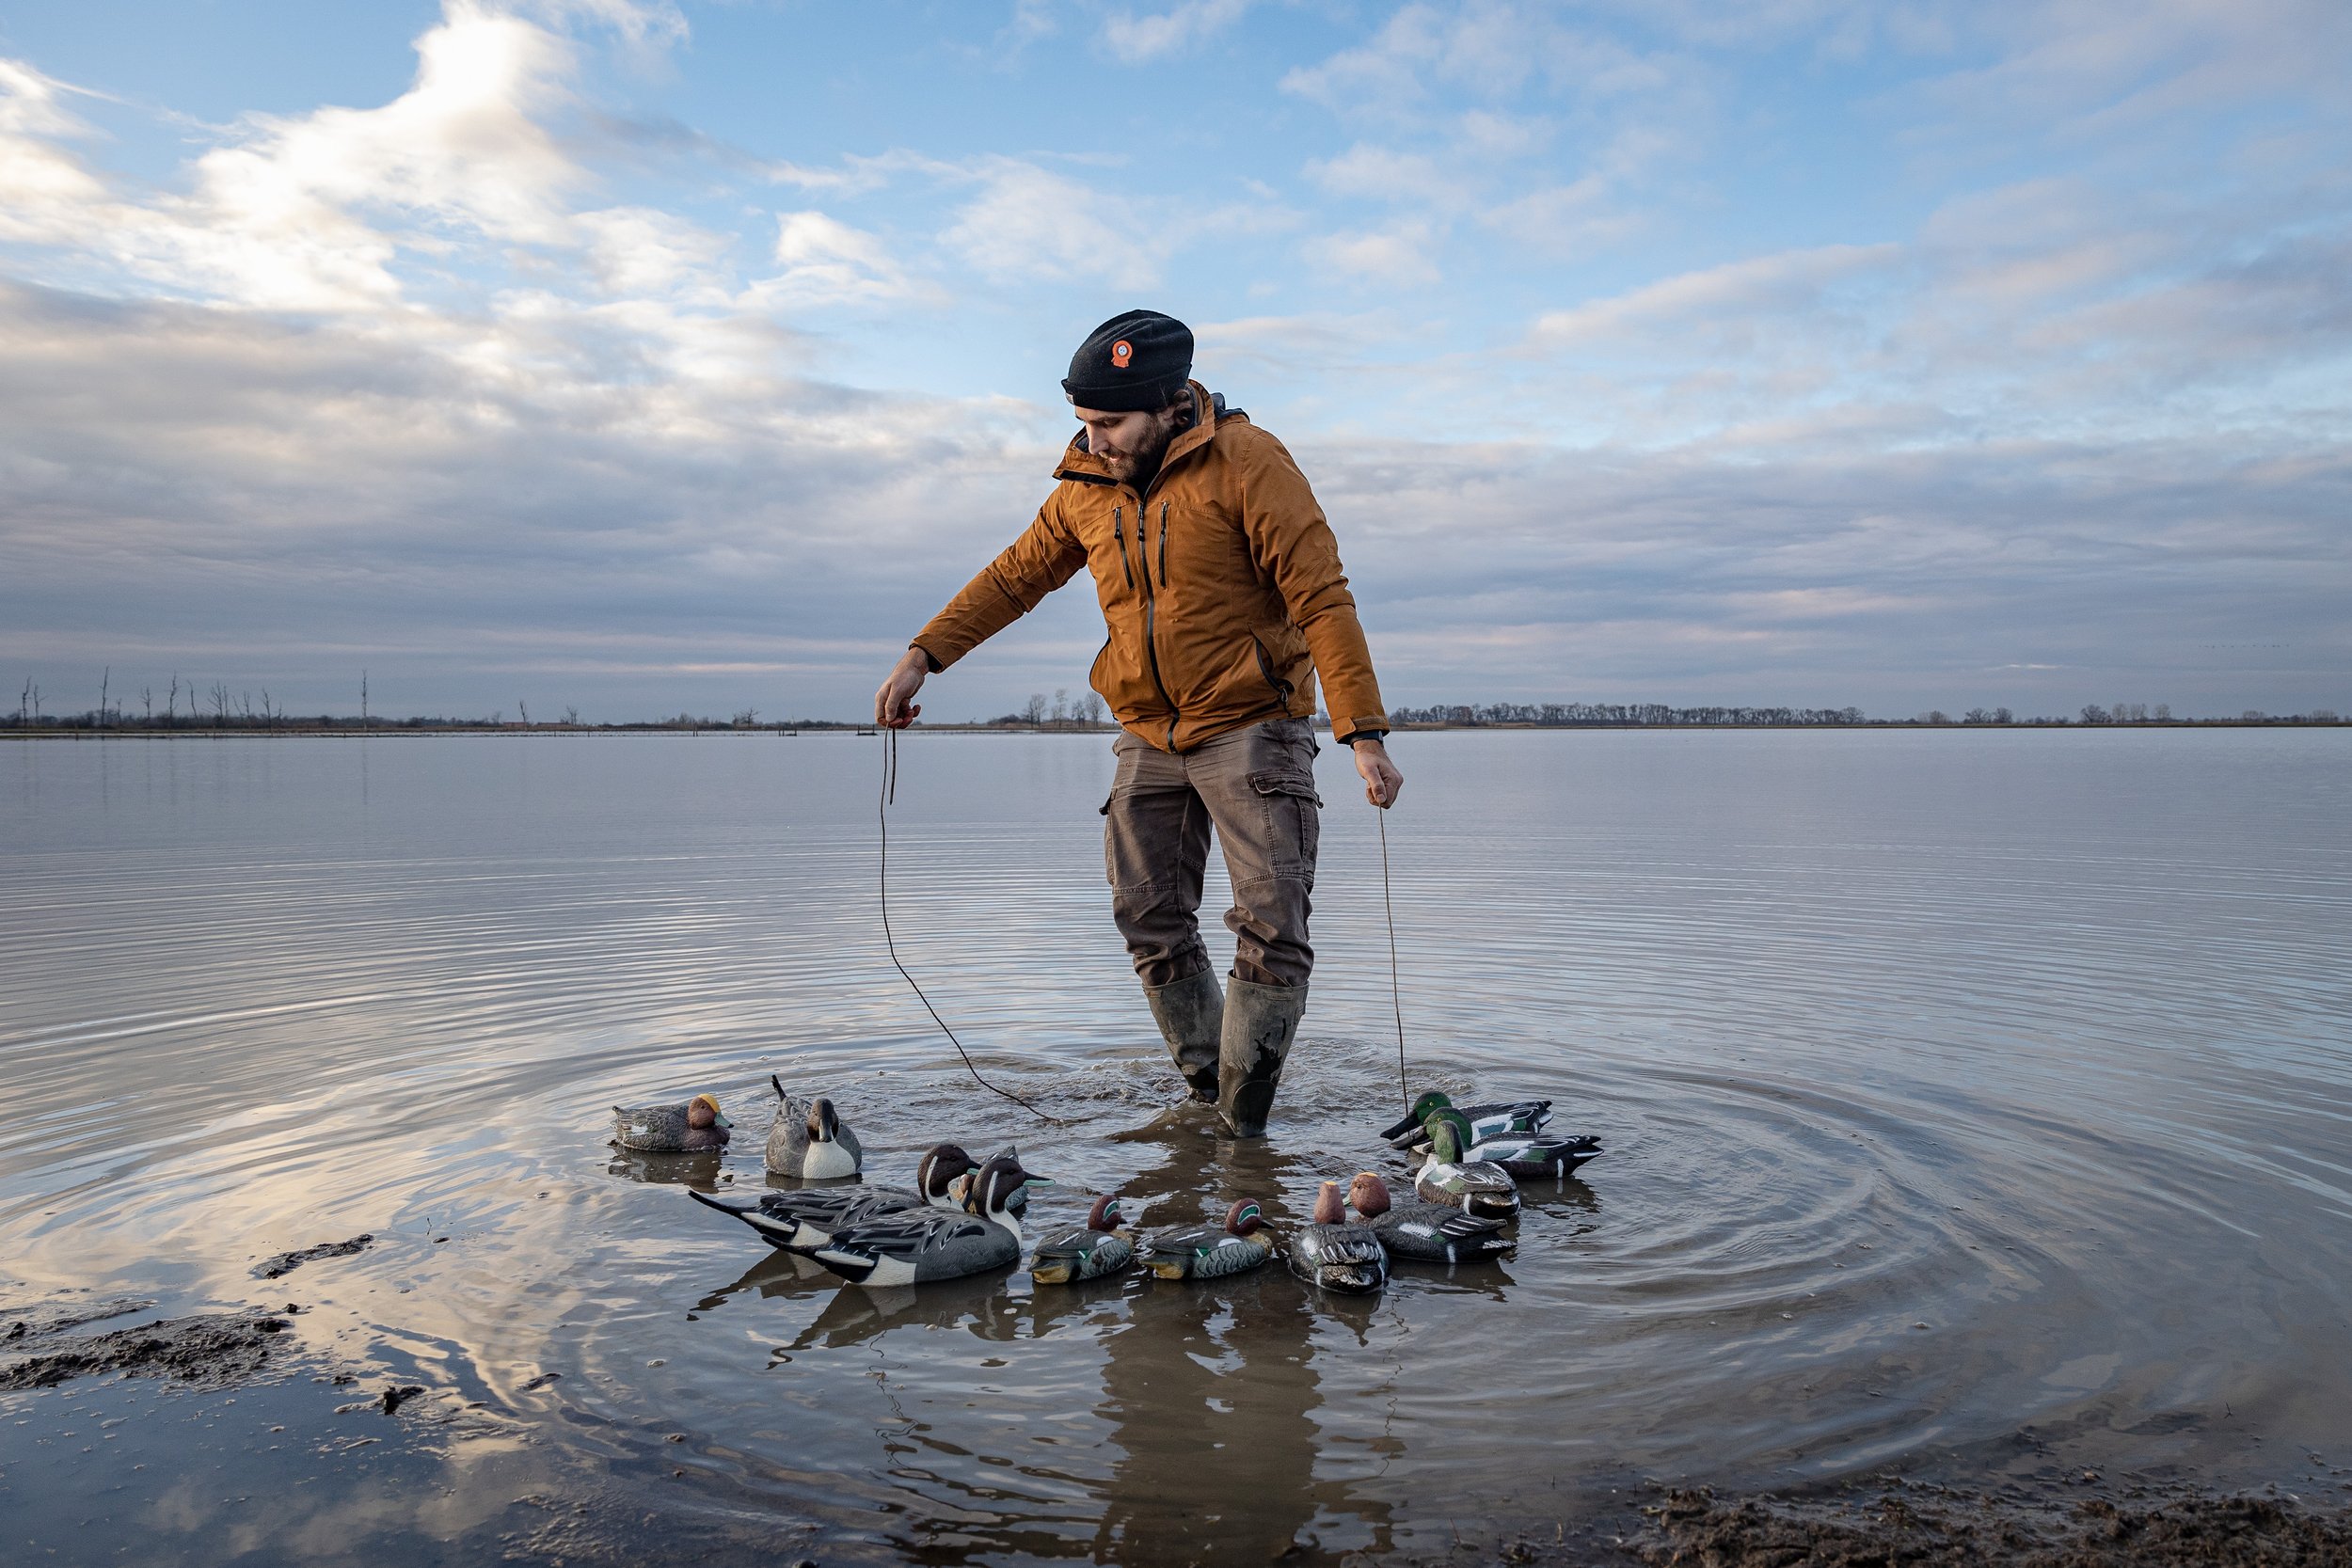  Hungary, Földes, 12. 01. 2023                            Ádám Lovas-Kiss bird researcher places decoys to help bird observation Abstract: Migratory waterfowl are important endozoochory vectors for a range of plants lacking fleshy fruits. Our aim was